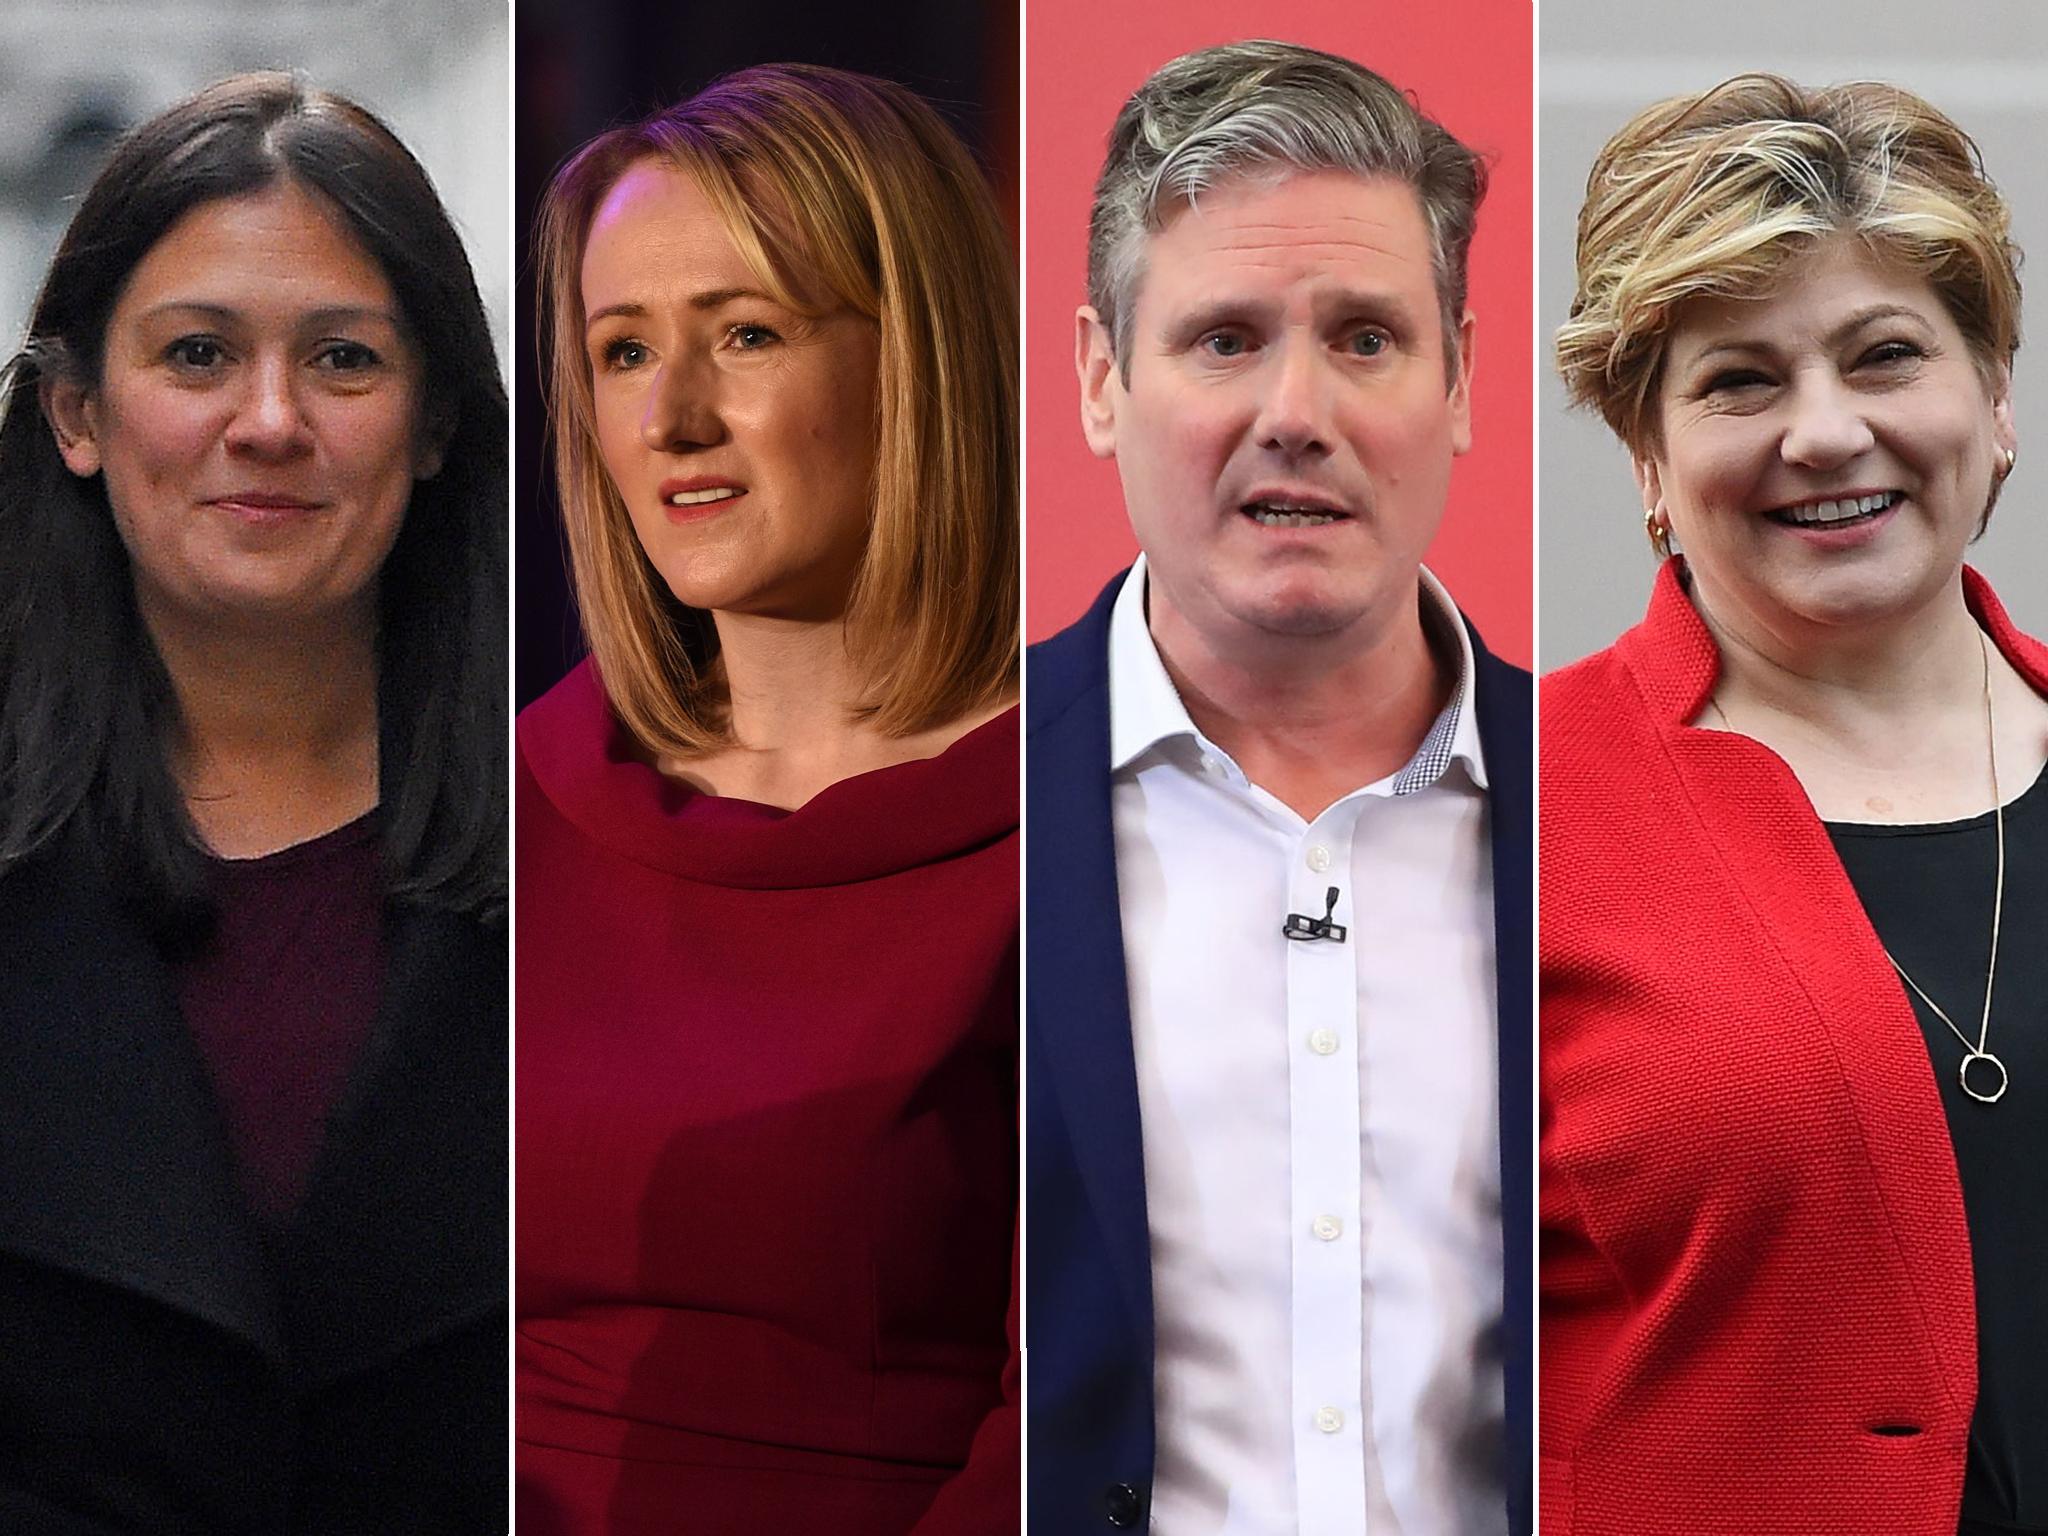 The four contenders for the Labour leadership: Lisa Nandy, Rebecca Long-Bailey, Sir Keir Starmer and Emily Thornberry